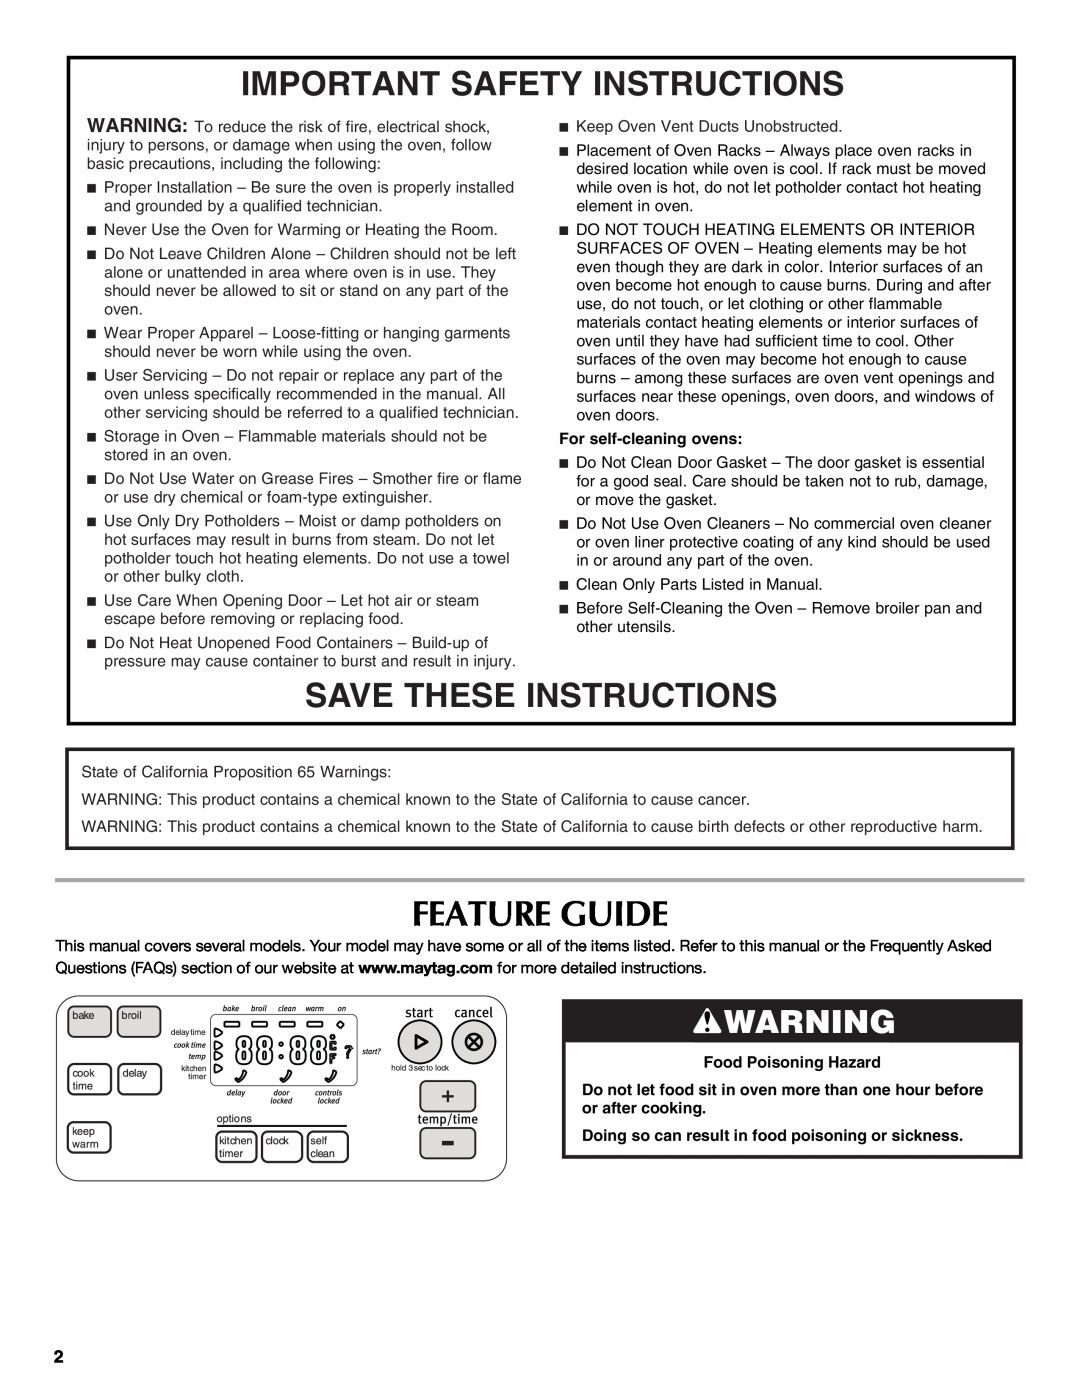 Maytag CWE4100ACB, CWE4100ACE Feature Guide, For self-cleaning ovens, Food Poisoning Hazard, Important Safety Instructions 